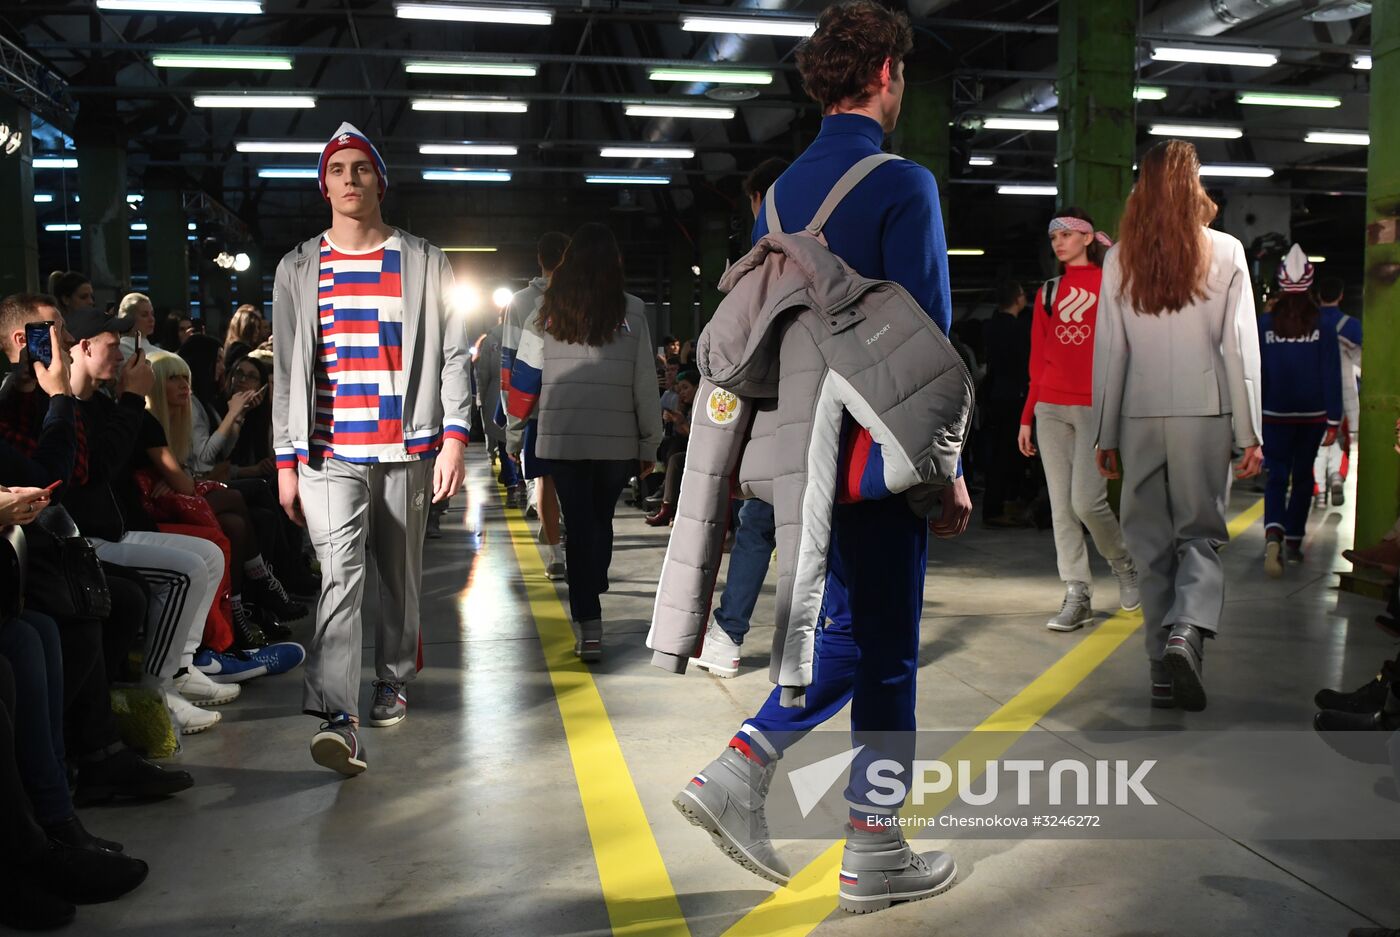 Olympic team outfit and Zasport brand casual collection showcased in Moscow